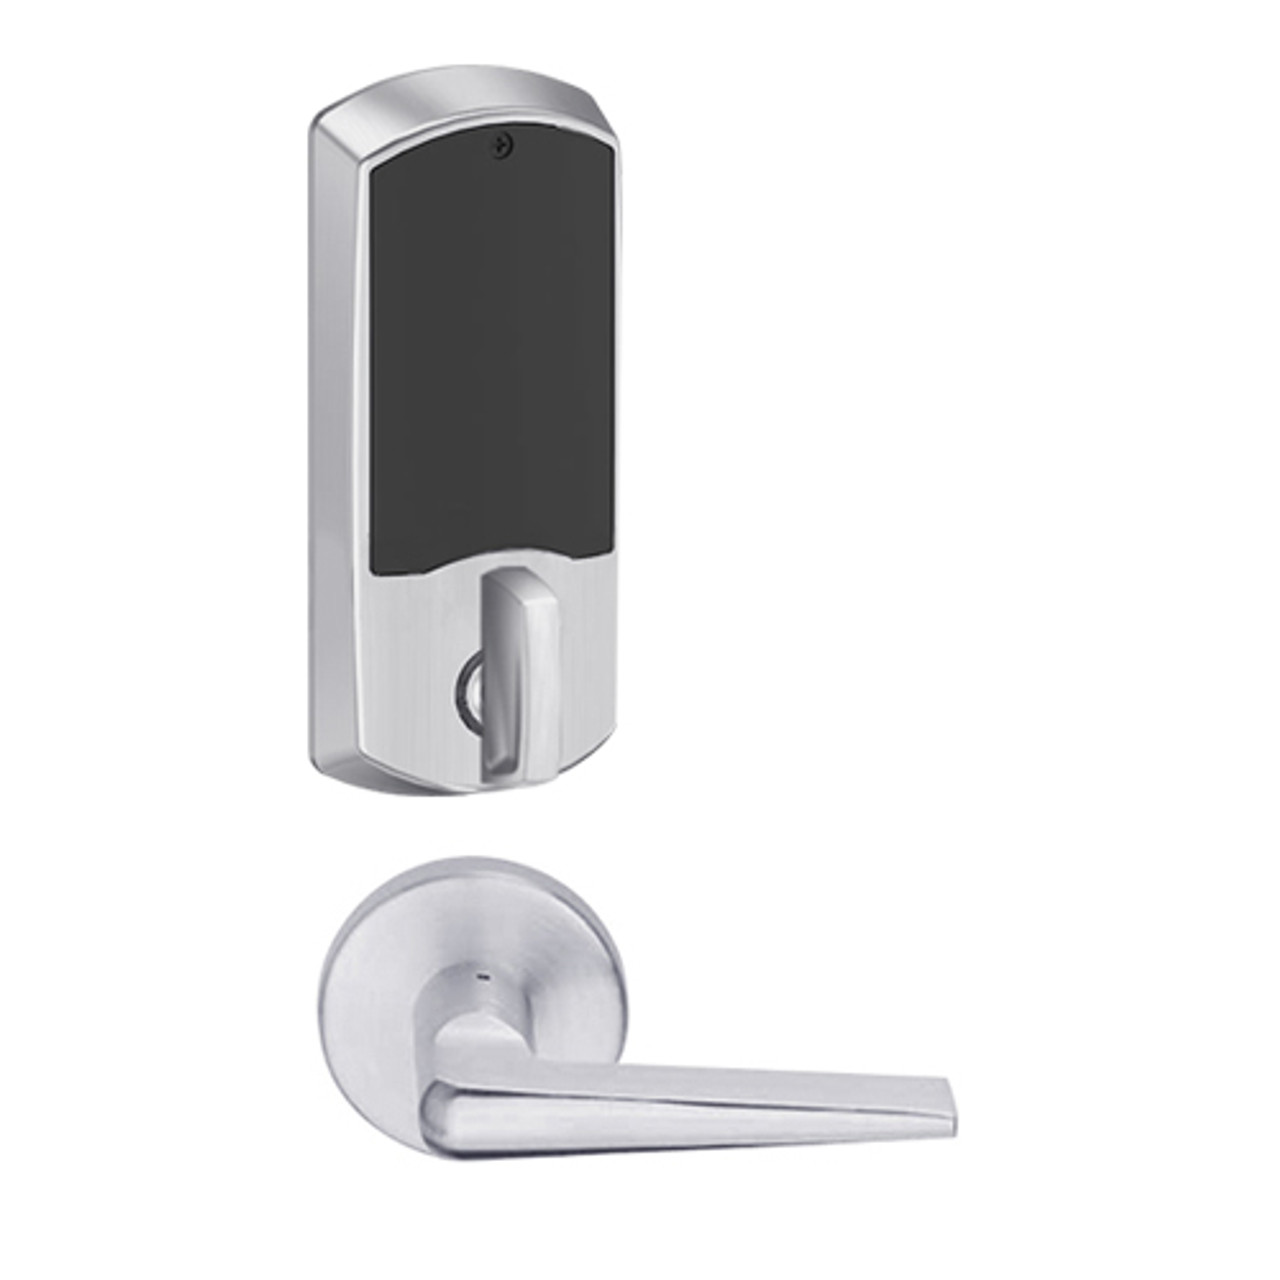 LEMD-GRW-BD-05-626-00B Schlage Privacy/Apartment Wireless Greenwich Mortise Deadbolt Lock with LED and 05 Lever Prepped for SFIC in Satin Chrome